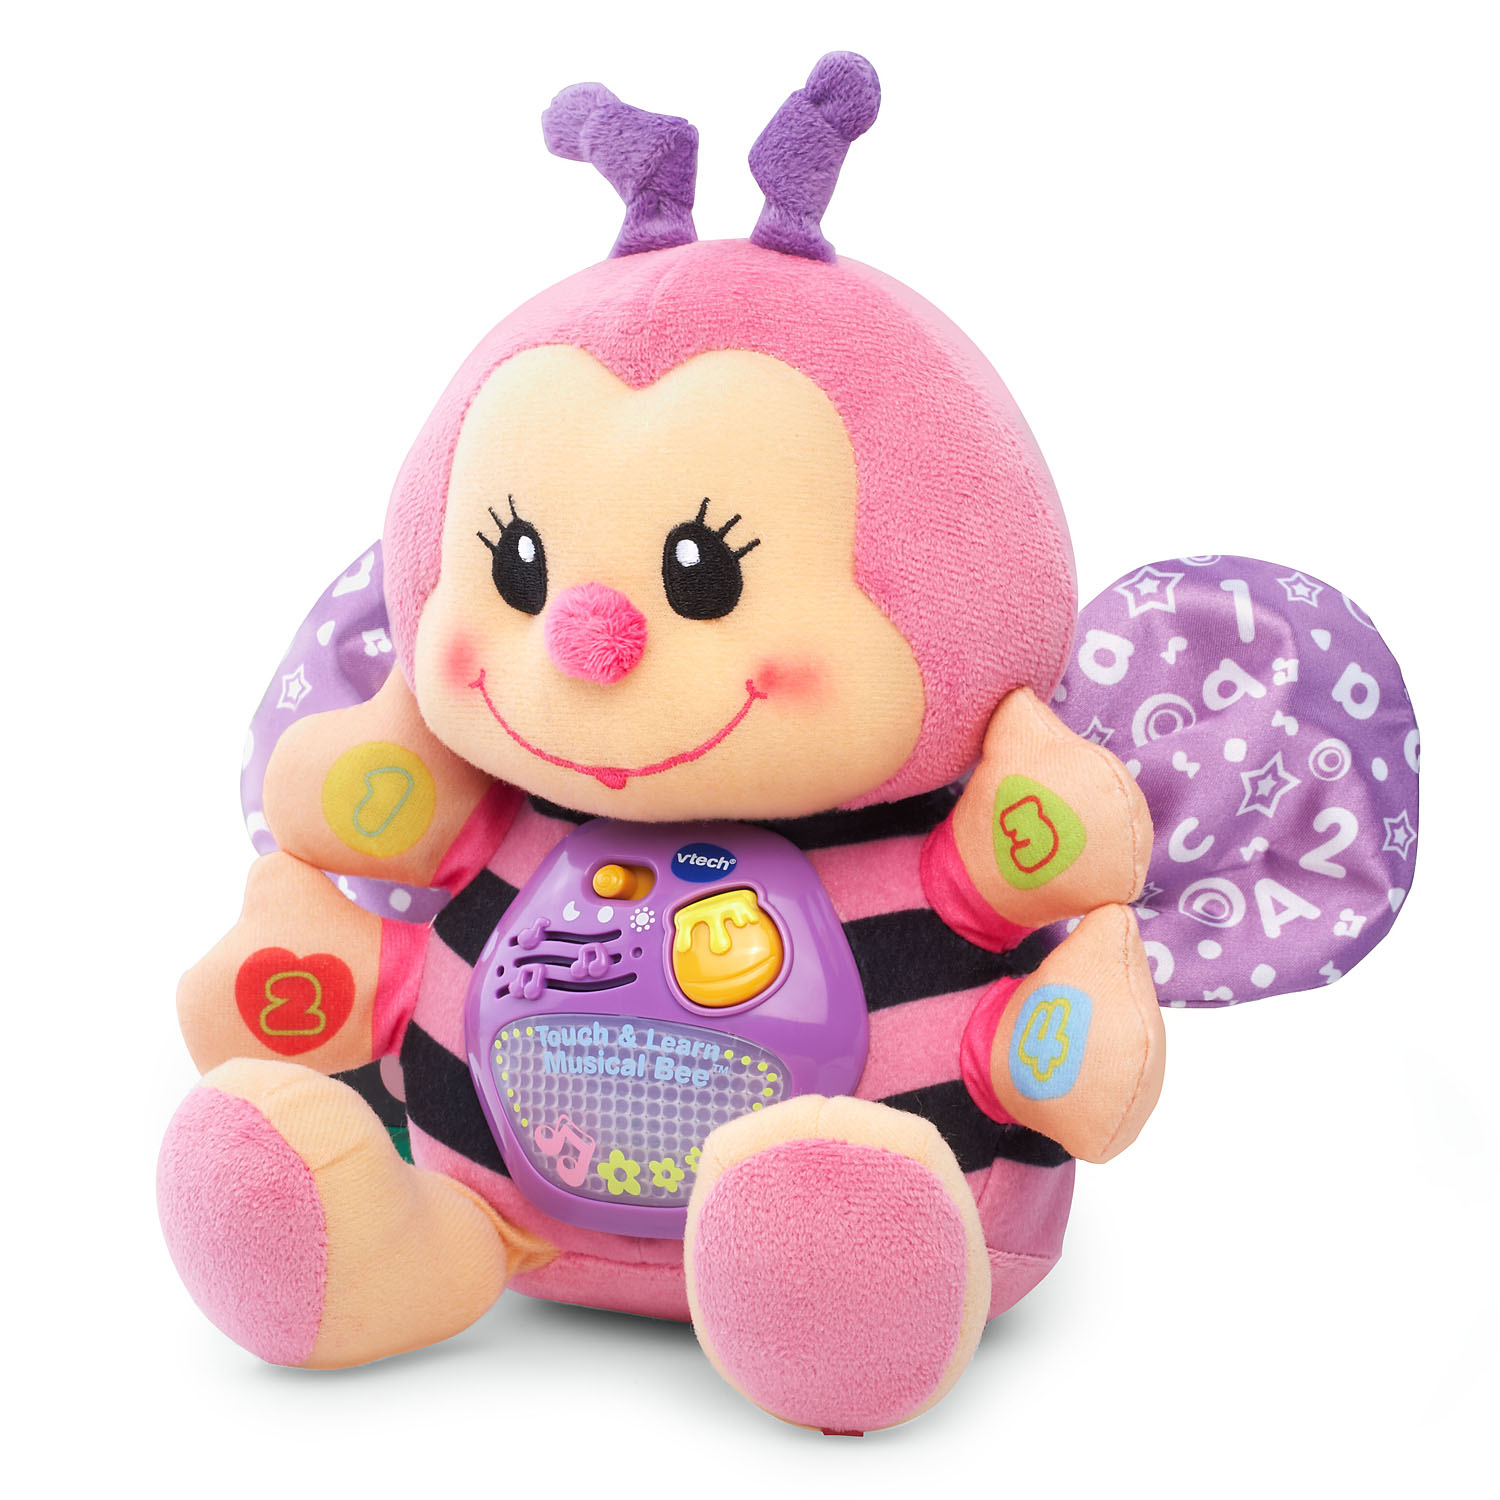 VTech Touch and Learn Musical Bee, Plush Crib Baby Toy, Pink, Walmart Exclusive - image 4 of 5